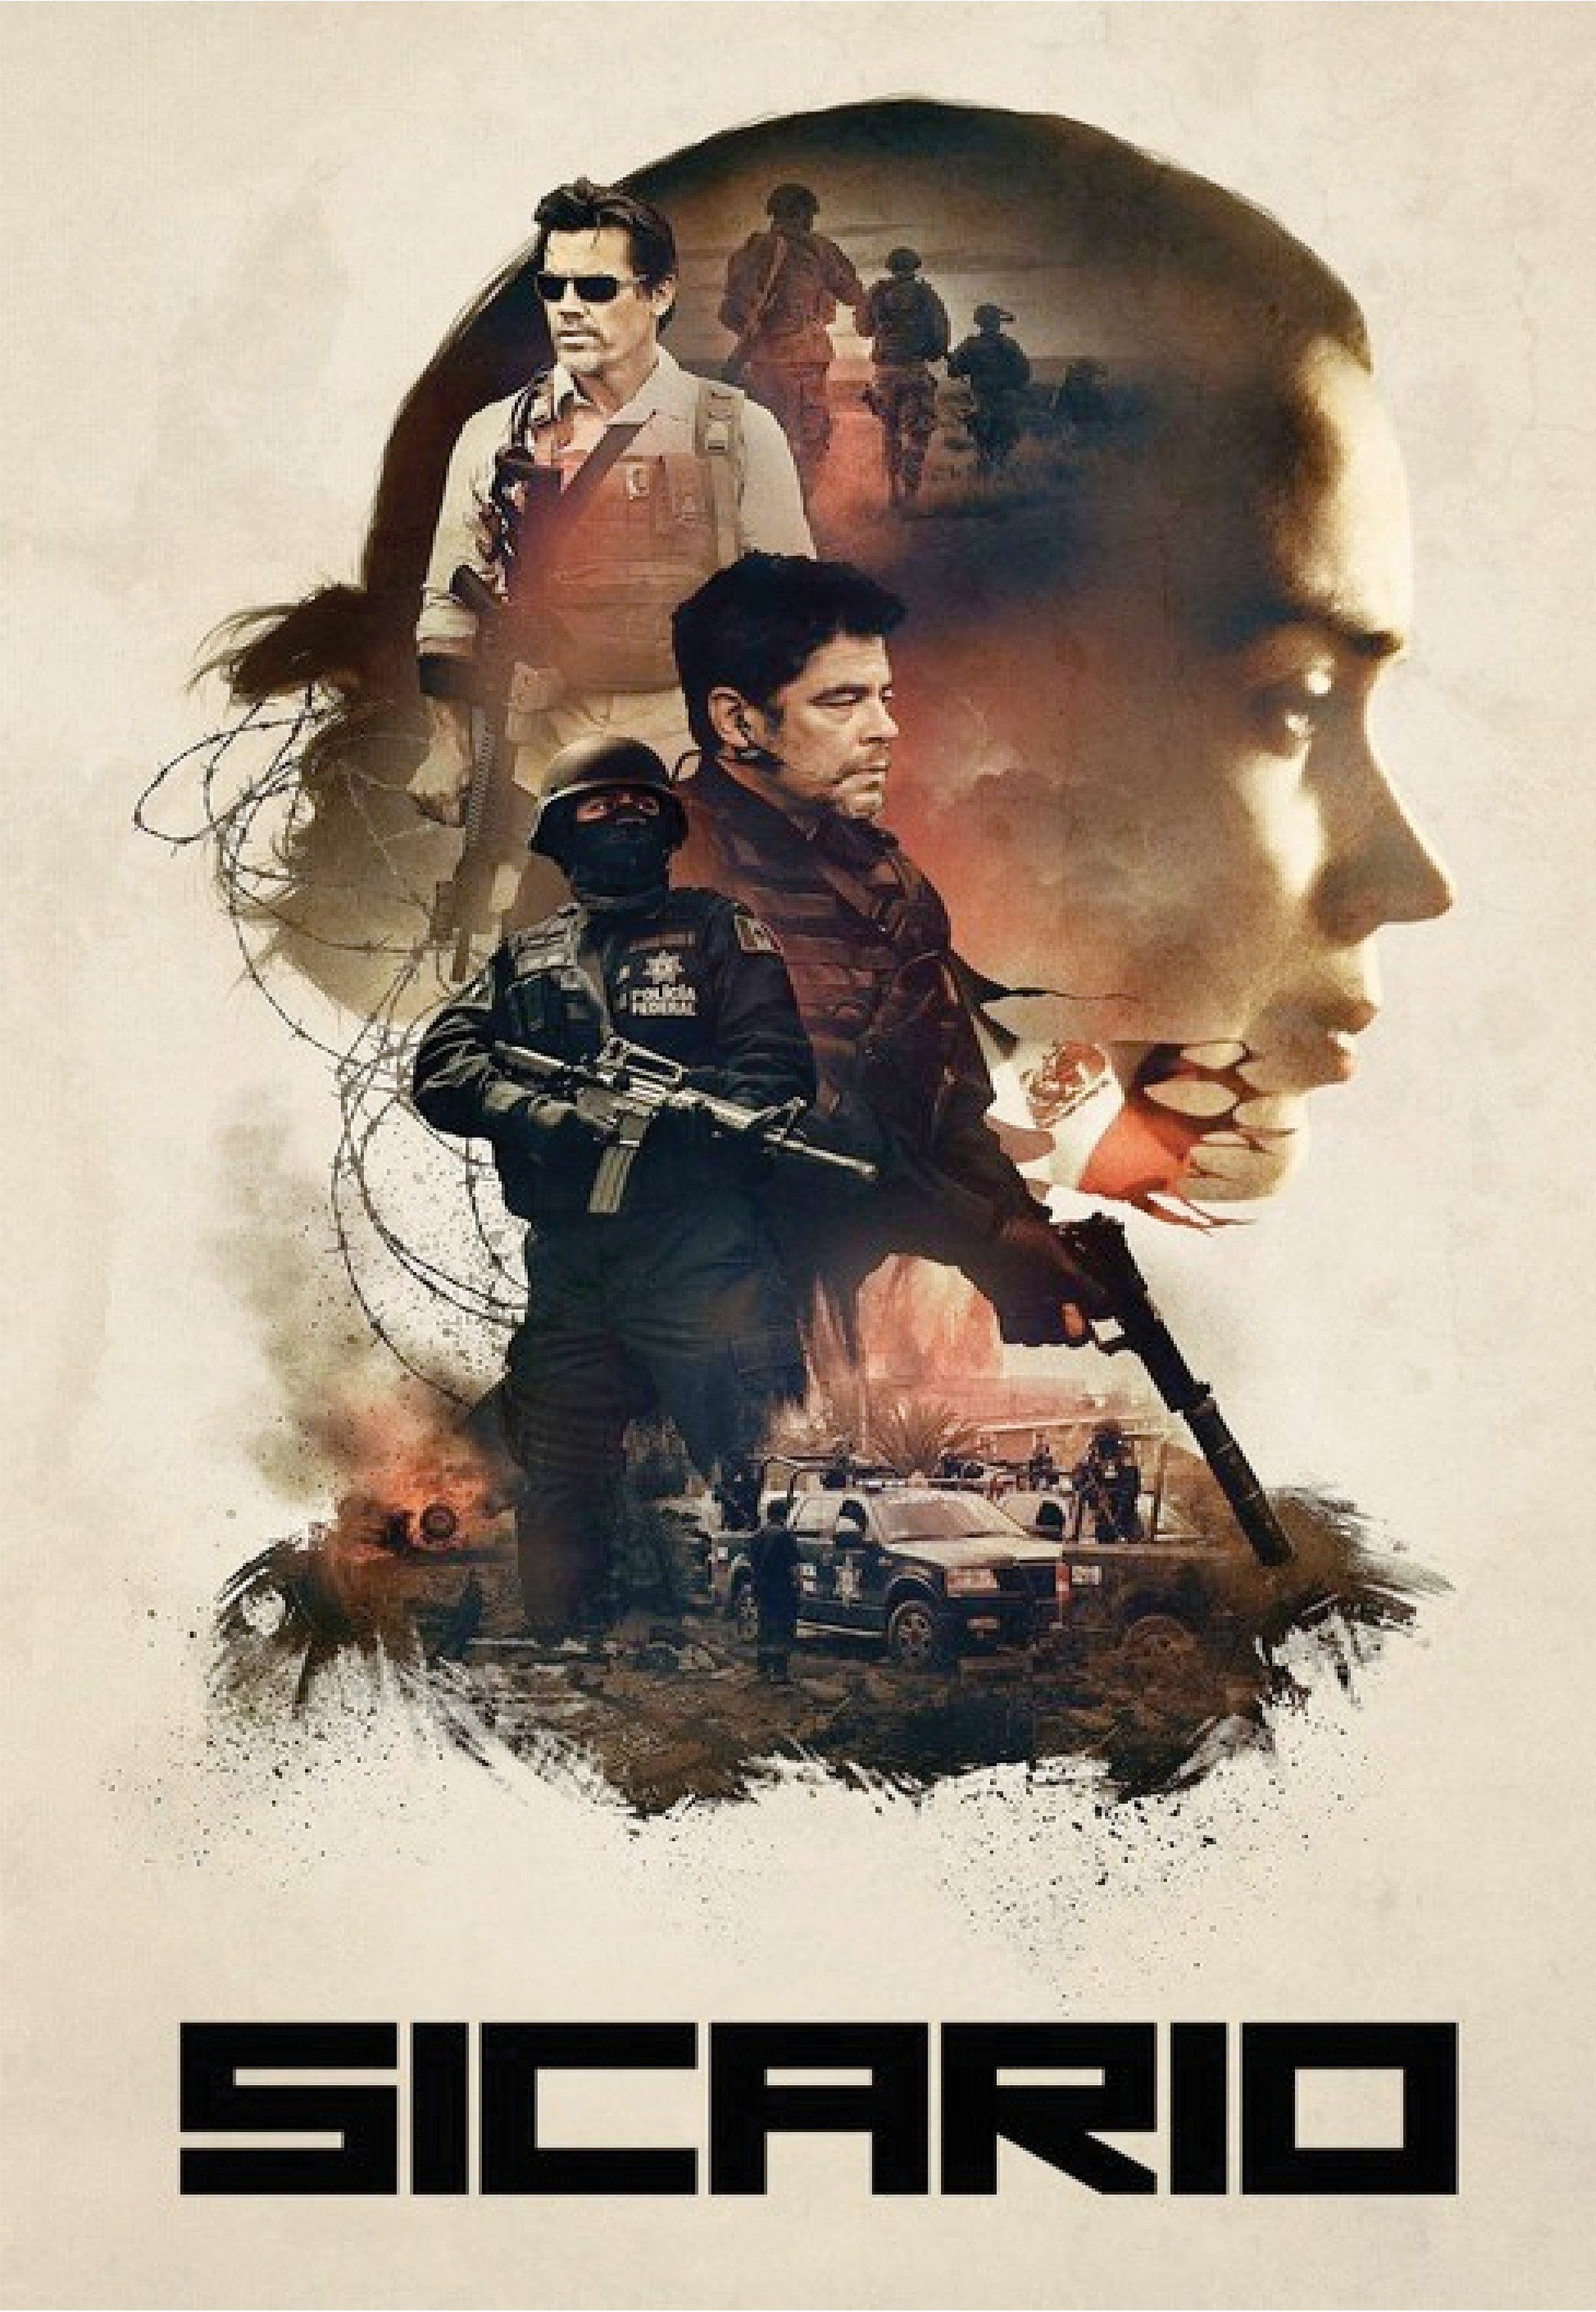 Movie poster for Sicario. The main characters are depicted wearing body armor and holding guns. Kate Macer's profile is cast in the background in a silhouette.